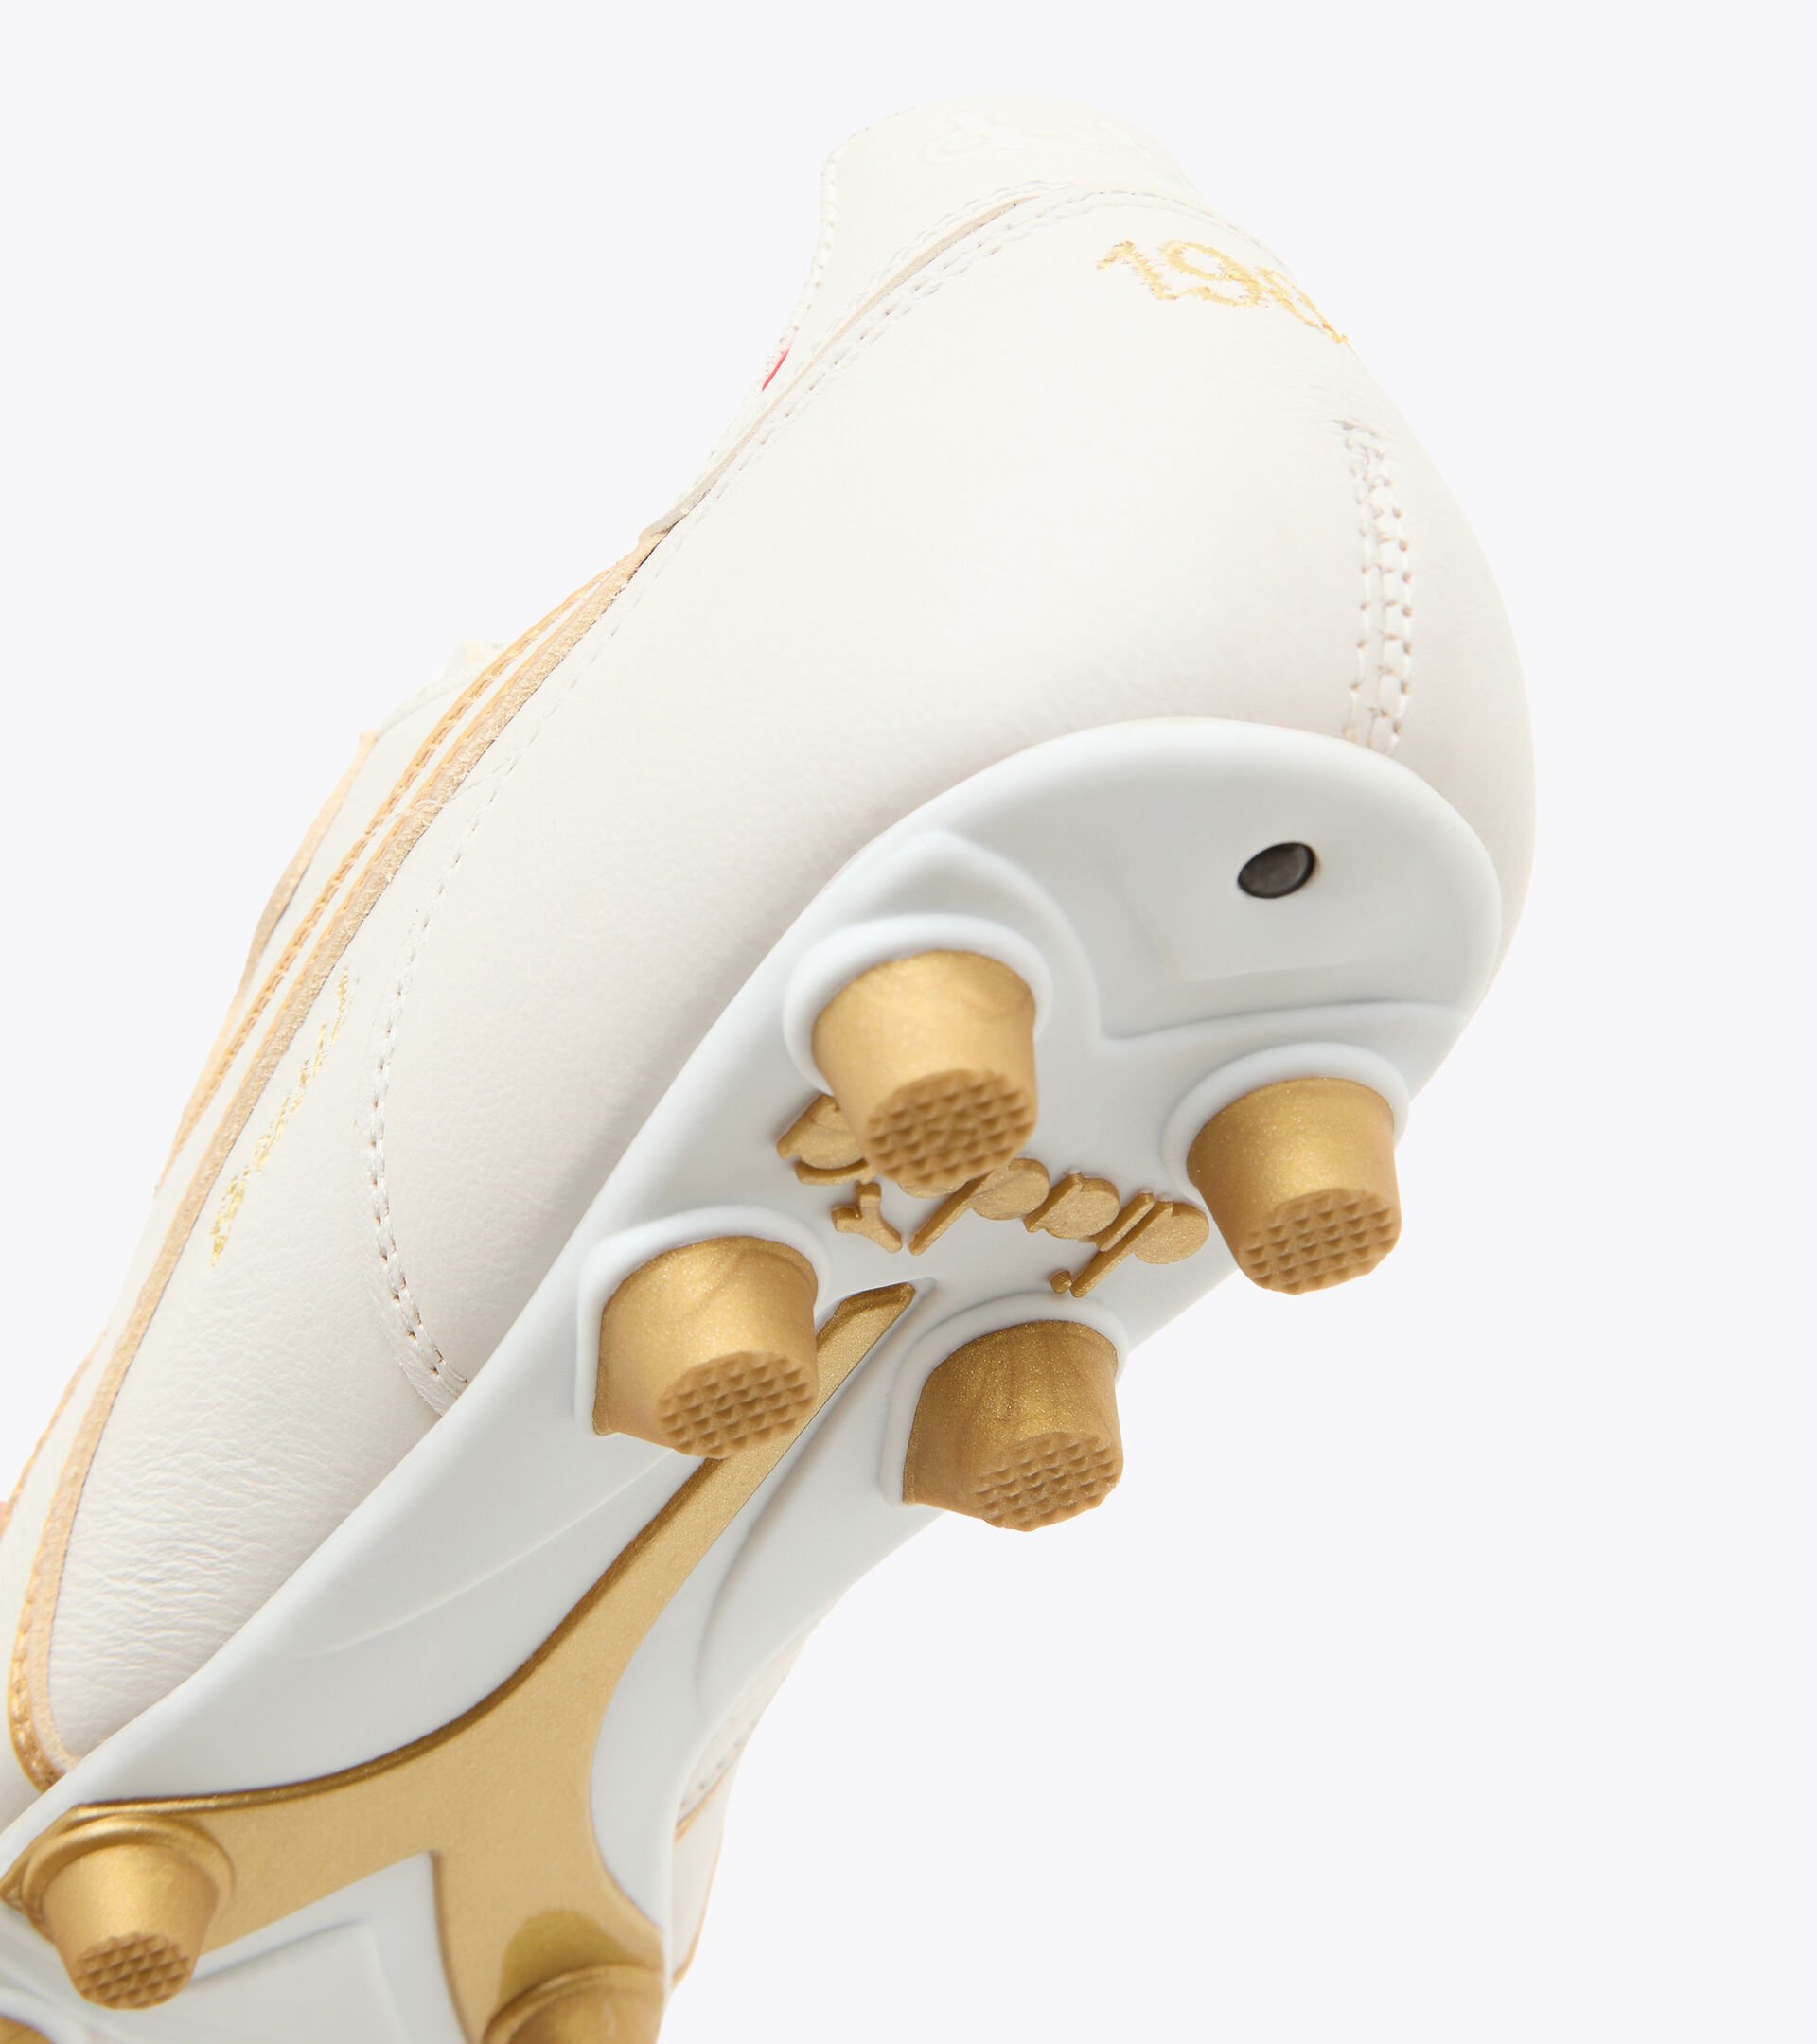 Firm ground football boots - Made in Italy BRASIL ITALY OG LT+  MDPU WHITE/GOLD - Diadora